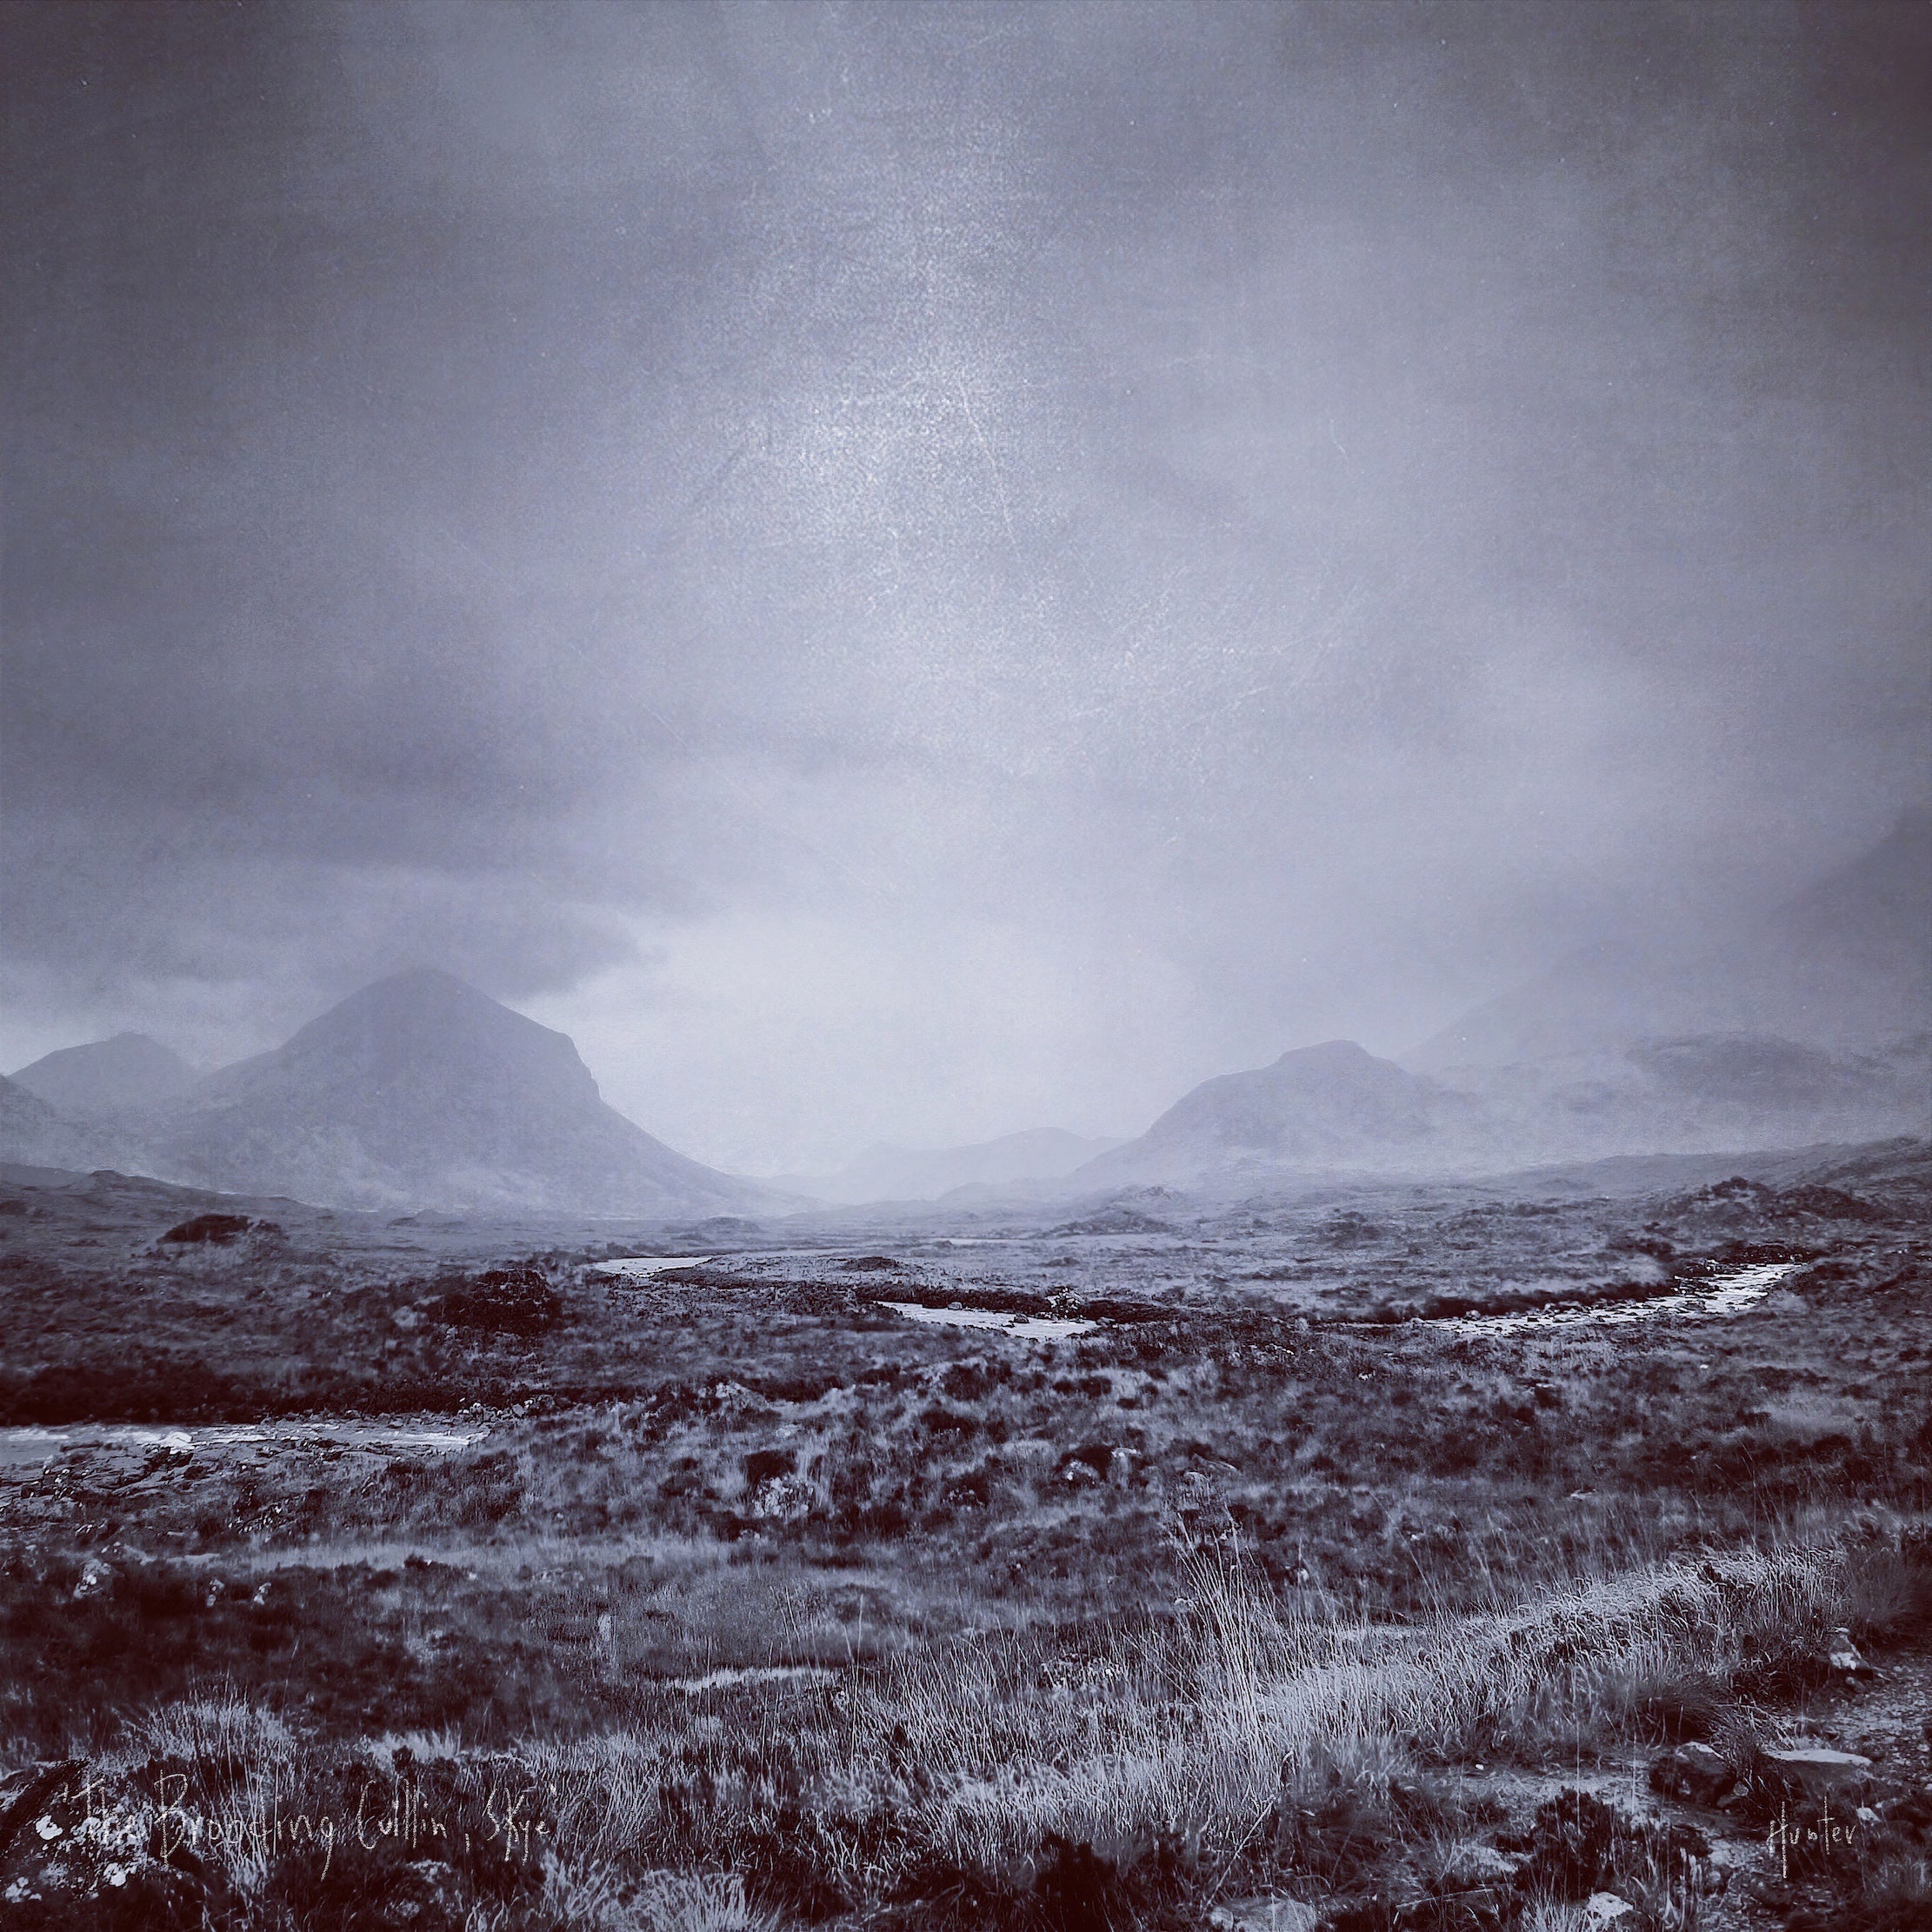 The Brooding Cuillin Skye | Scotland In Your Pocket Art Print-Scotland In Your Pocket Framed Prints-Skye Art Gallery-Mounted & Cello Bag: 12.5x12.5 cm-Black Frame-Paintings, Prints, Homeware, Art Gifts From Scotland By Scottish Artist Kevin Hunter